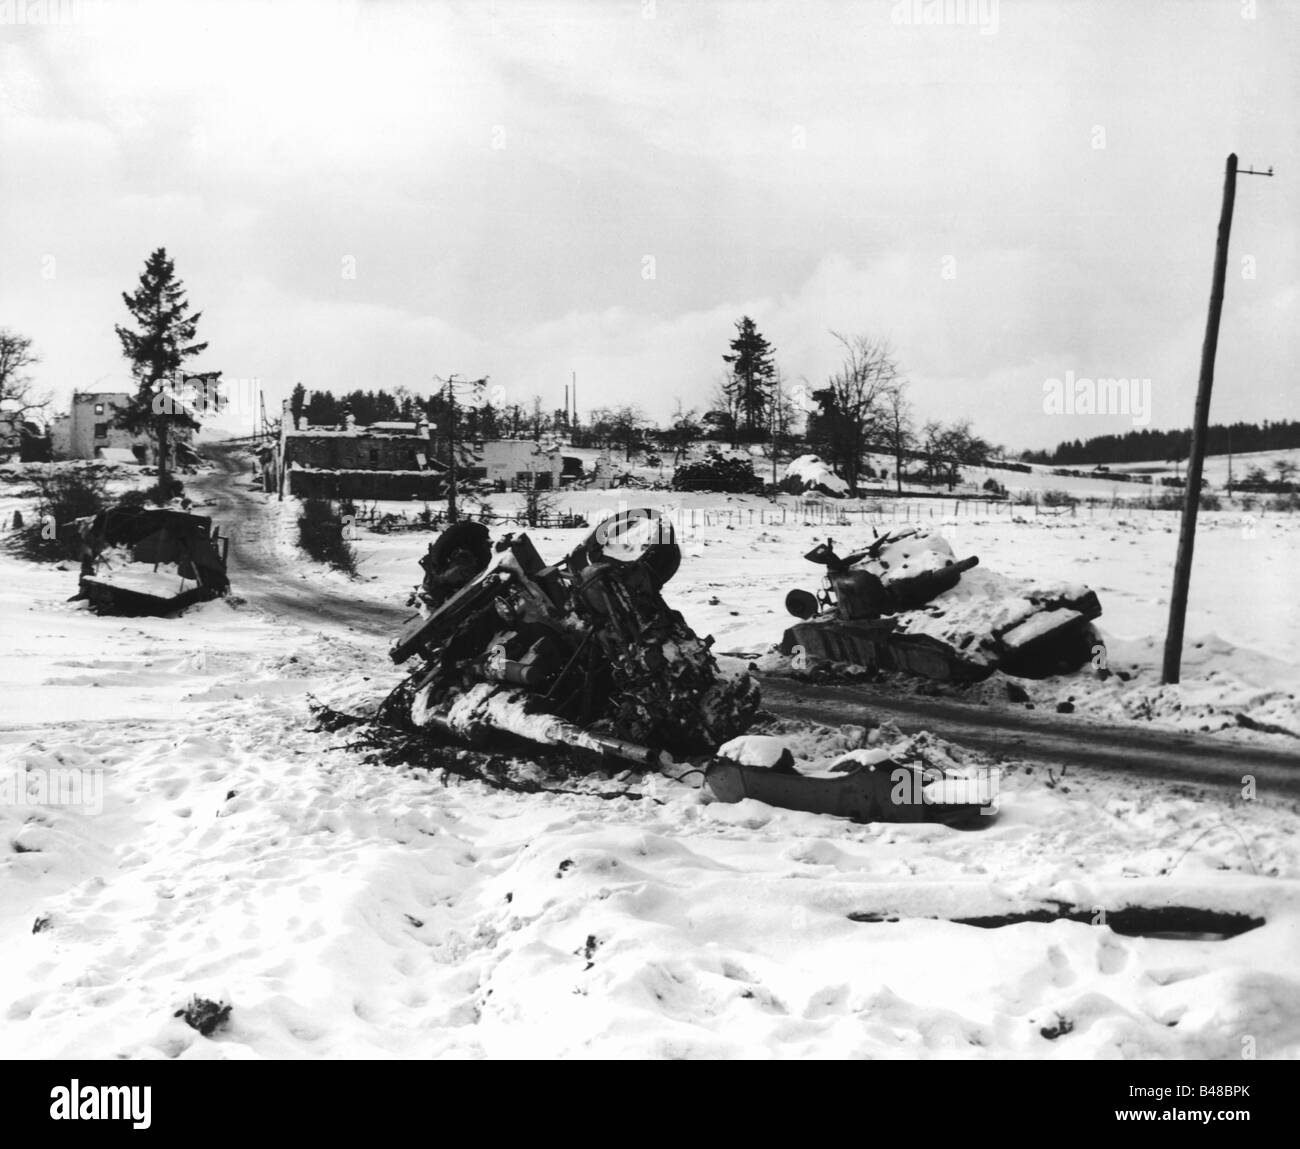 events, Second World War / WWII, Belgium, Battle of the Bulge, Allied counterattack, destroyed equipent after an attack of the 35th US Division against Lutremange, 13.1.1945, Western Front, Ardennes, offensive, 88 mm Flak 36, gun, anti aircraft gun, anti-aircraft M4 Sherman, tank, M 4, armoured fighting vehicle, road, winter, snow, defeat, Third Reich, Germany, USA, destruction, 20th century, historic, historical, 8.8 cm, people, 1940s, Stock Photo